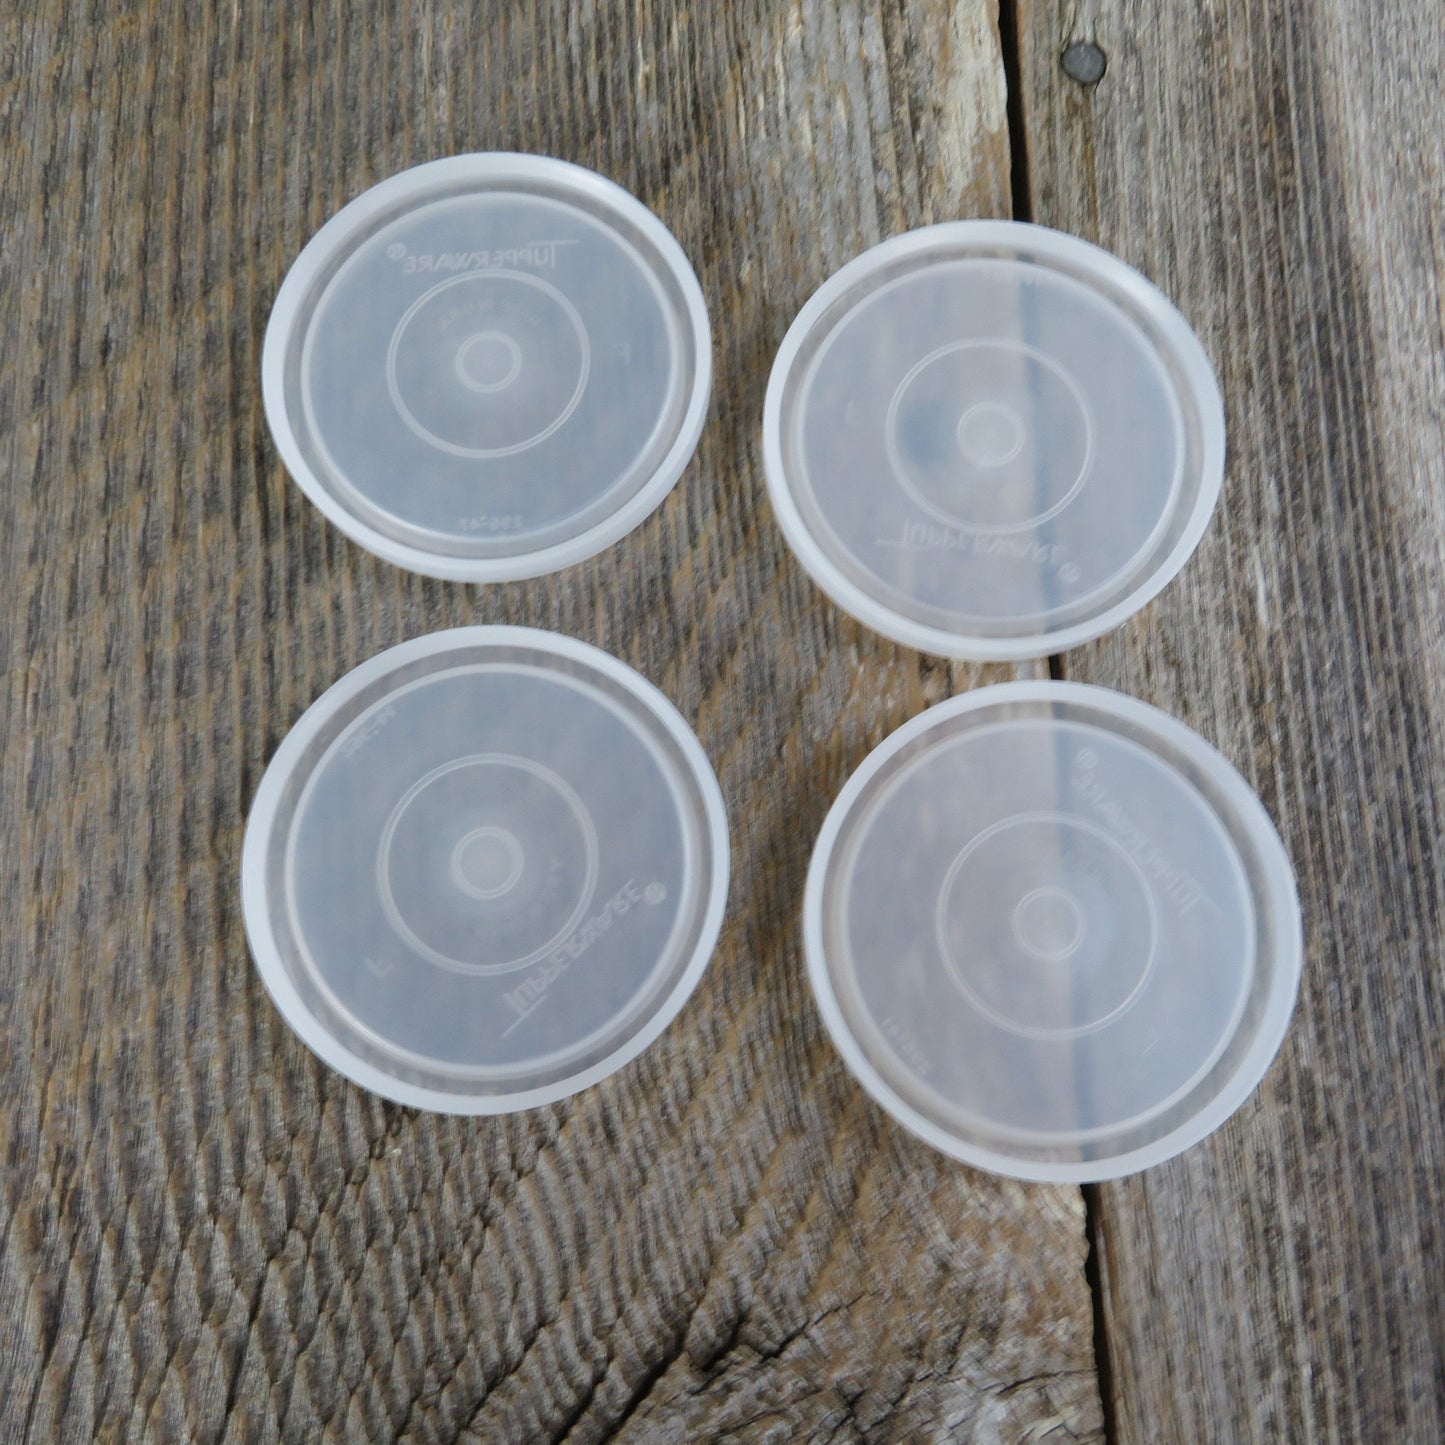 Vintage Tupperware Lid 296 Set of 4 Seal Replacement Fits Tumbler F Cup Plastic Covers 12 and 6 Ounce Drinking Glass White